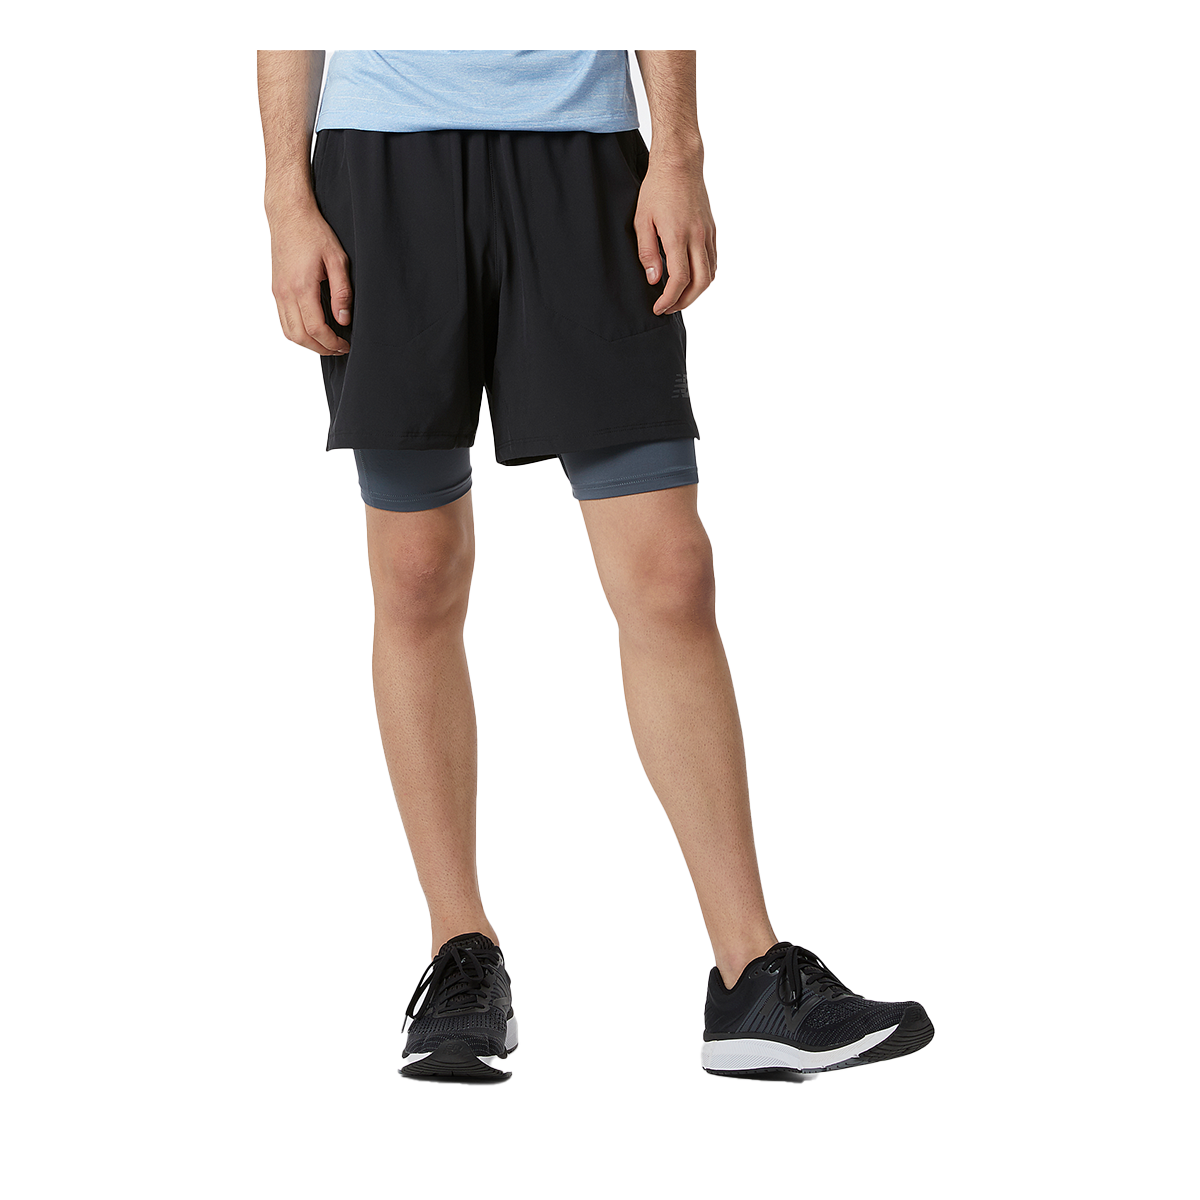 New Balance R.W. Tech 7" 2-in-1 Short, , large image number null